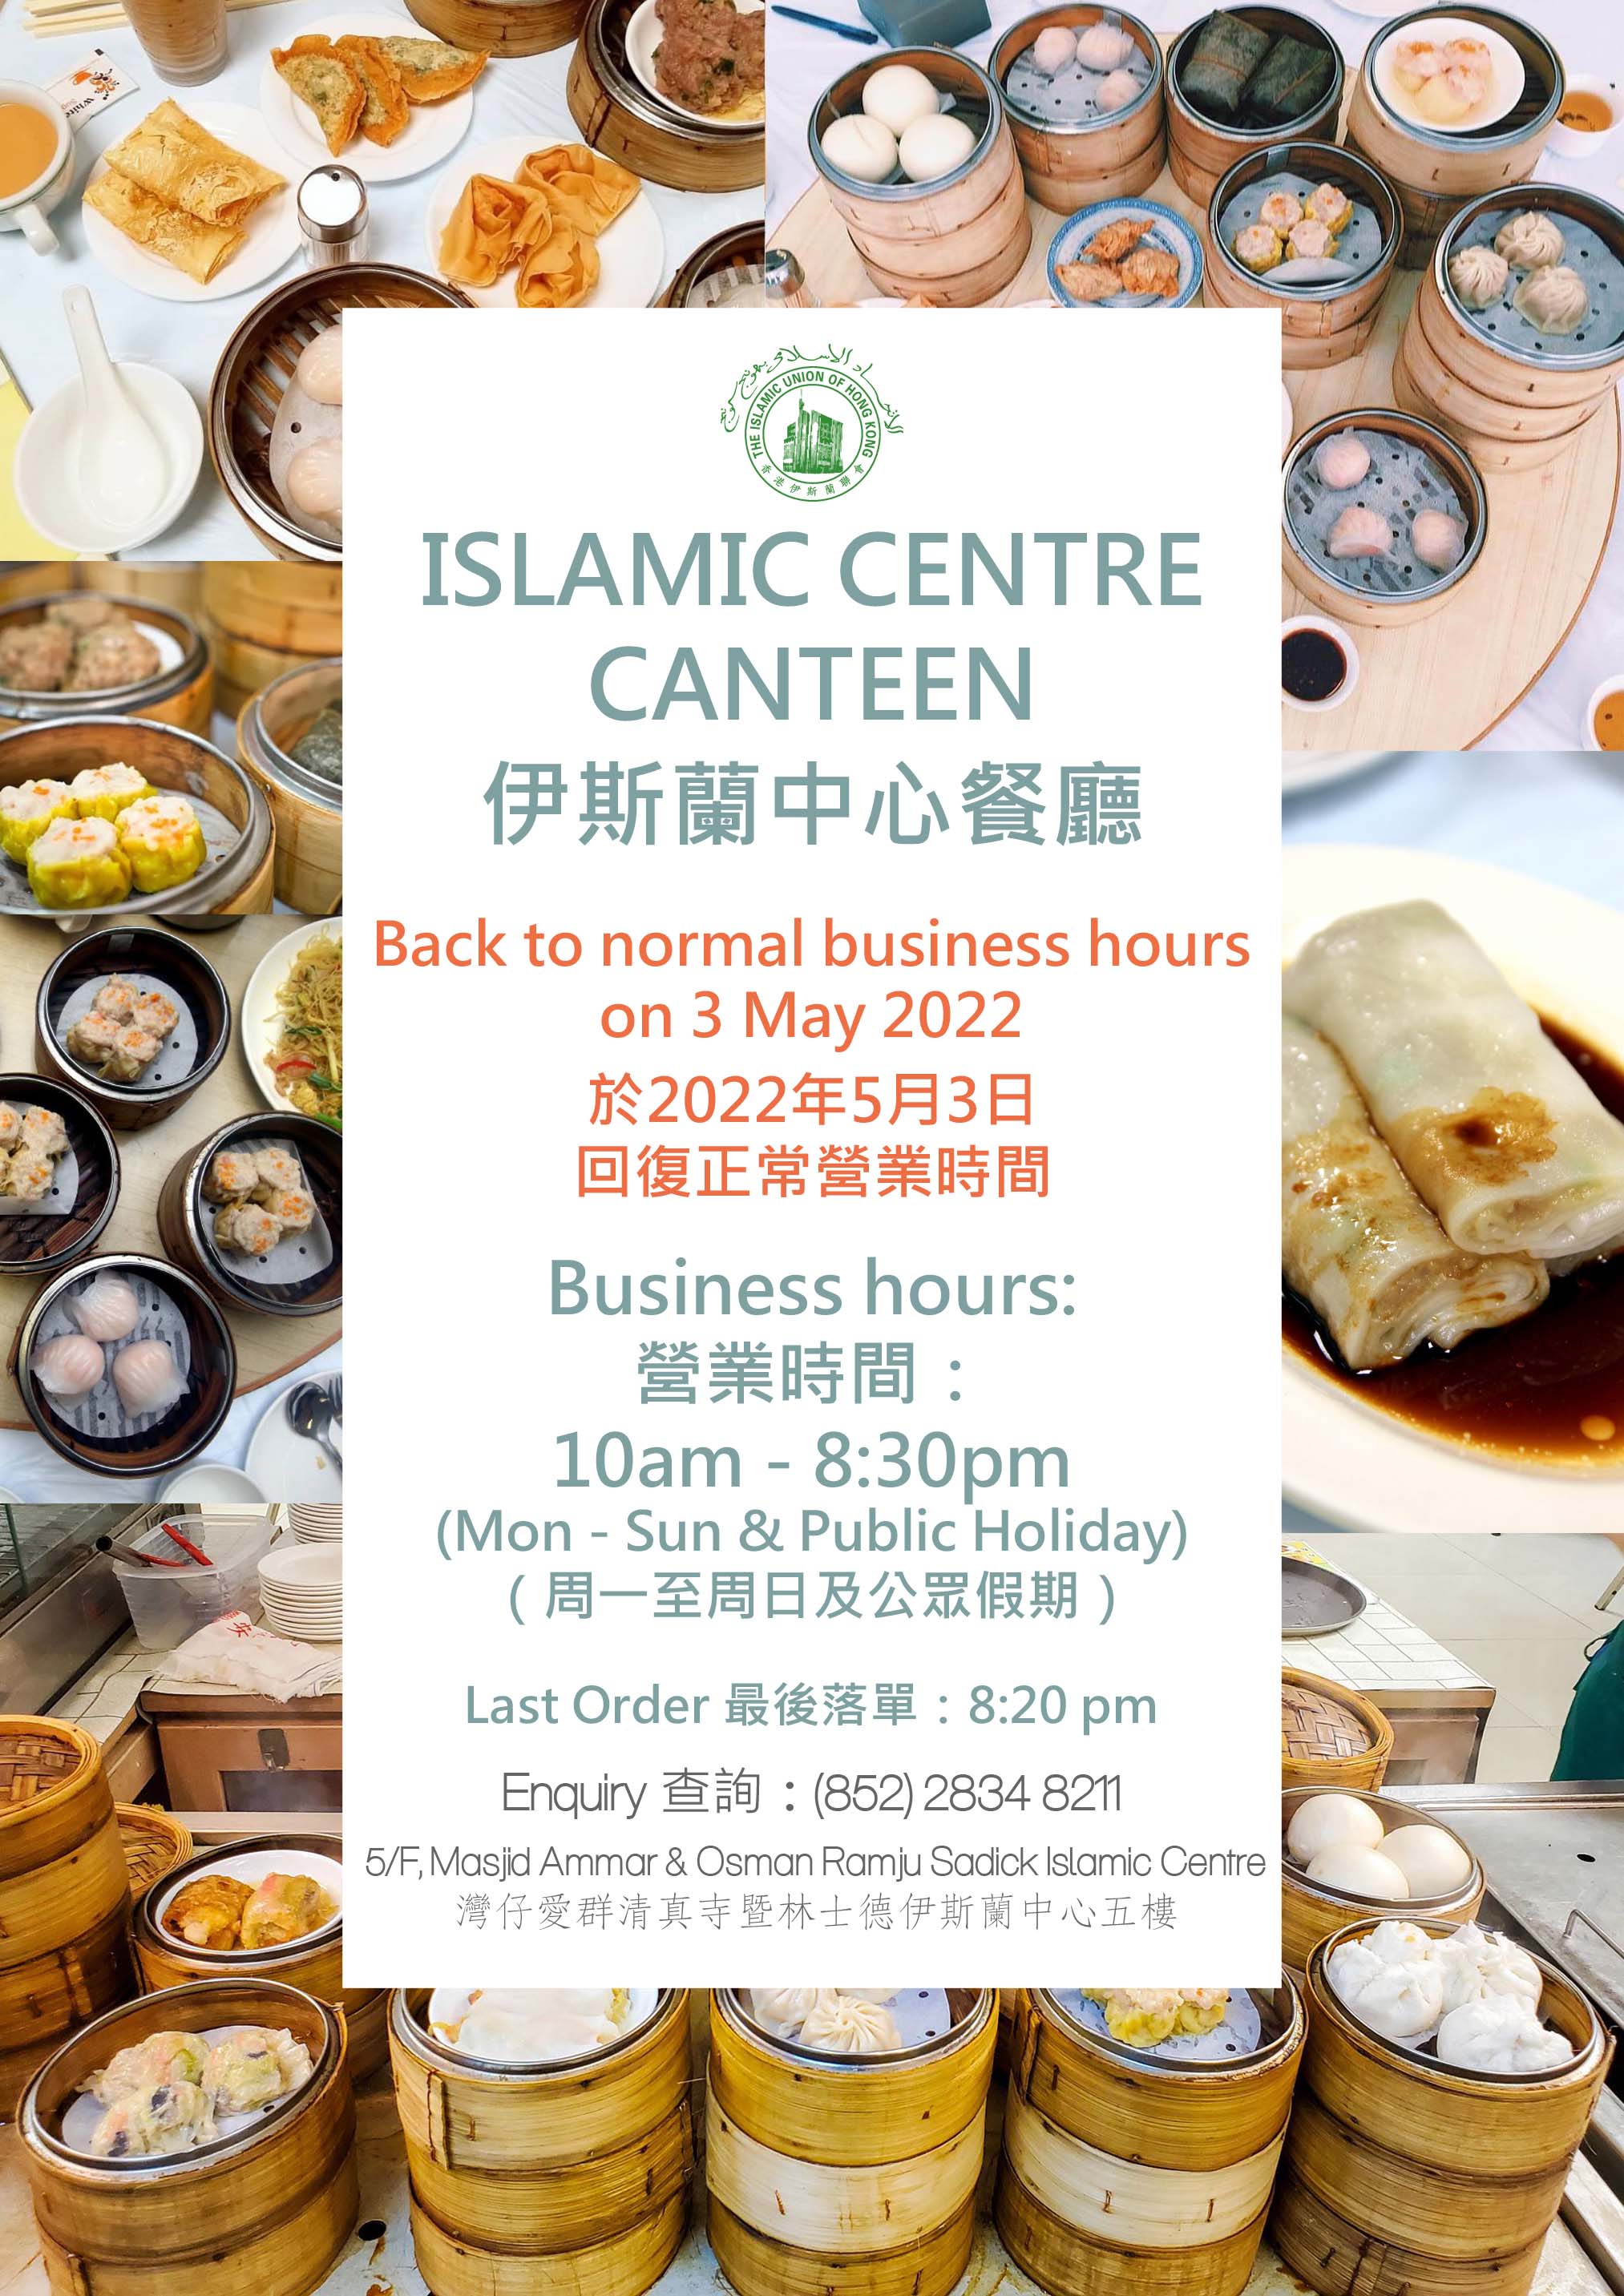 Islamic Centre Canteen Re-opening on 3 May 2022